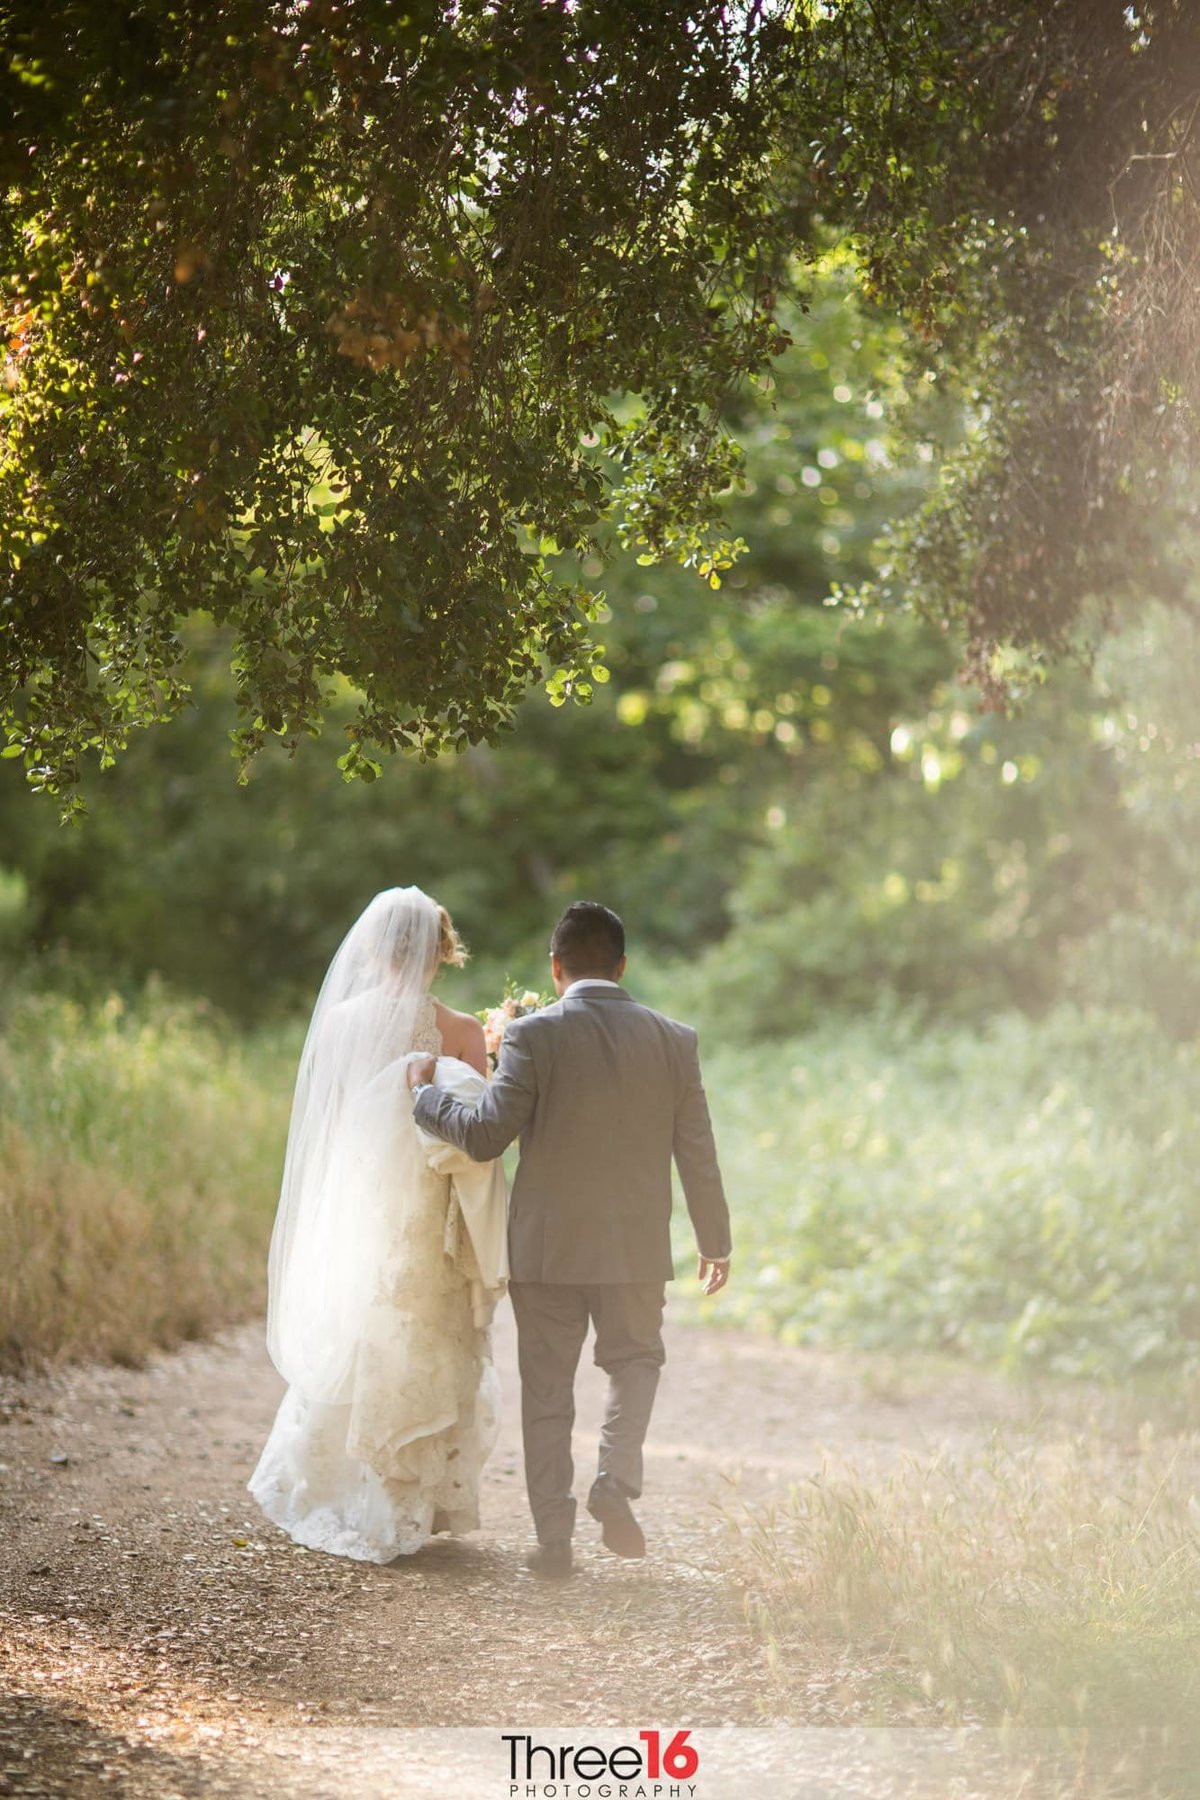 Bride and Groom go for a walk in the country side